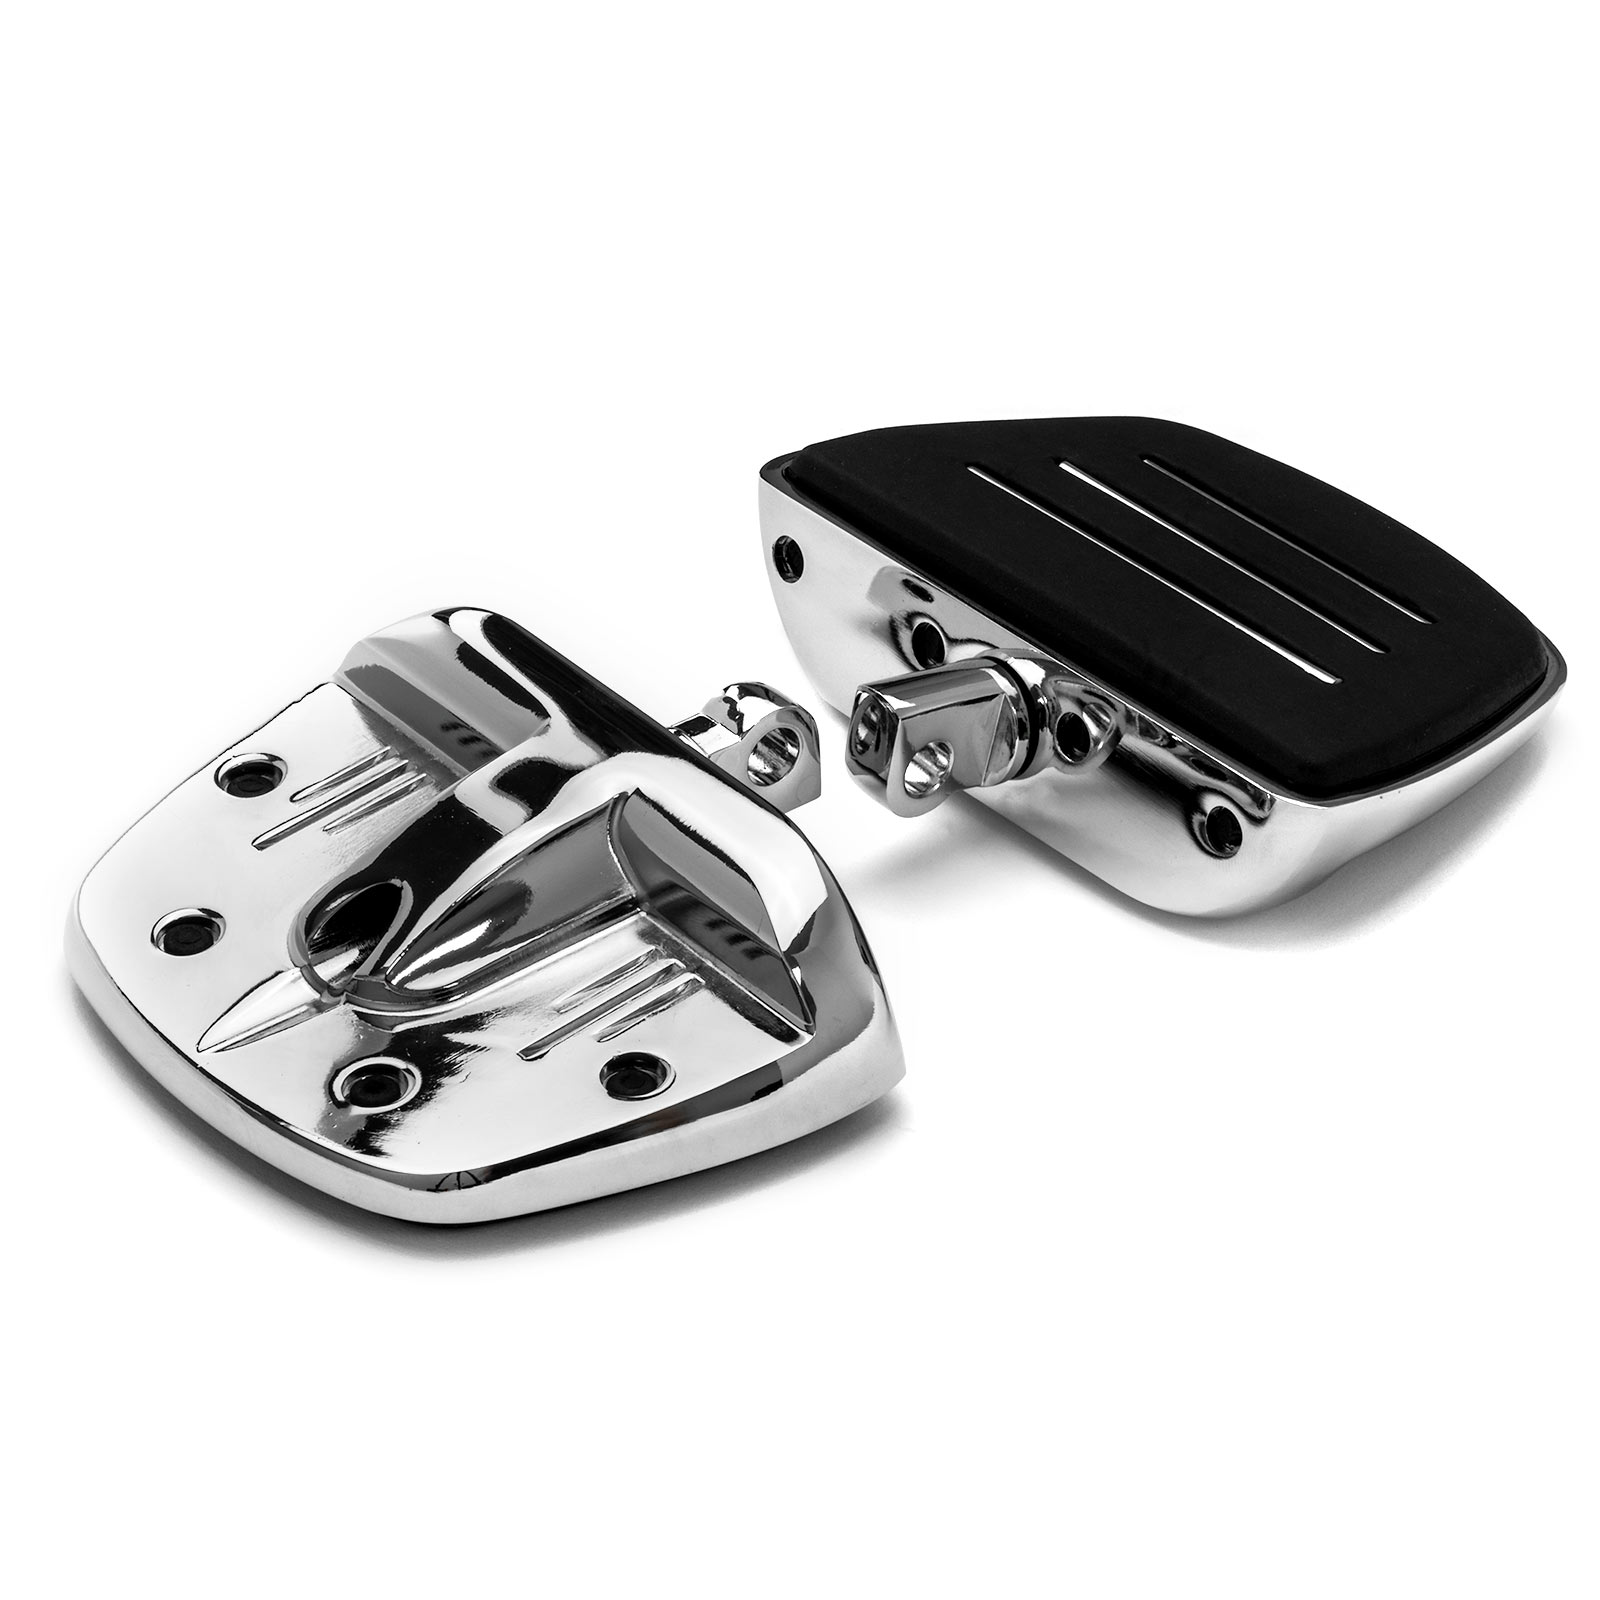 Krator Chrome Mini Board Floorboards Footpegs Compatible with 2010-2017 Harley Davidson Wide Glide FXDWG